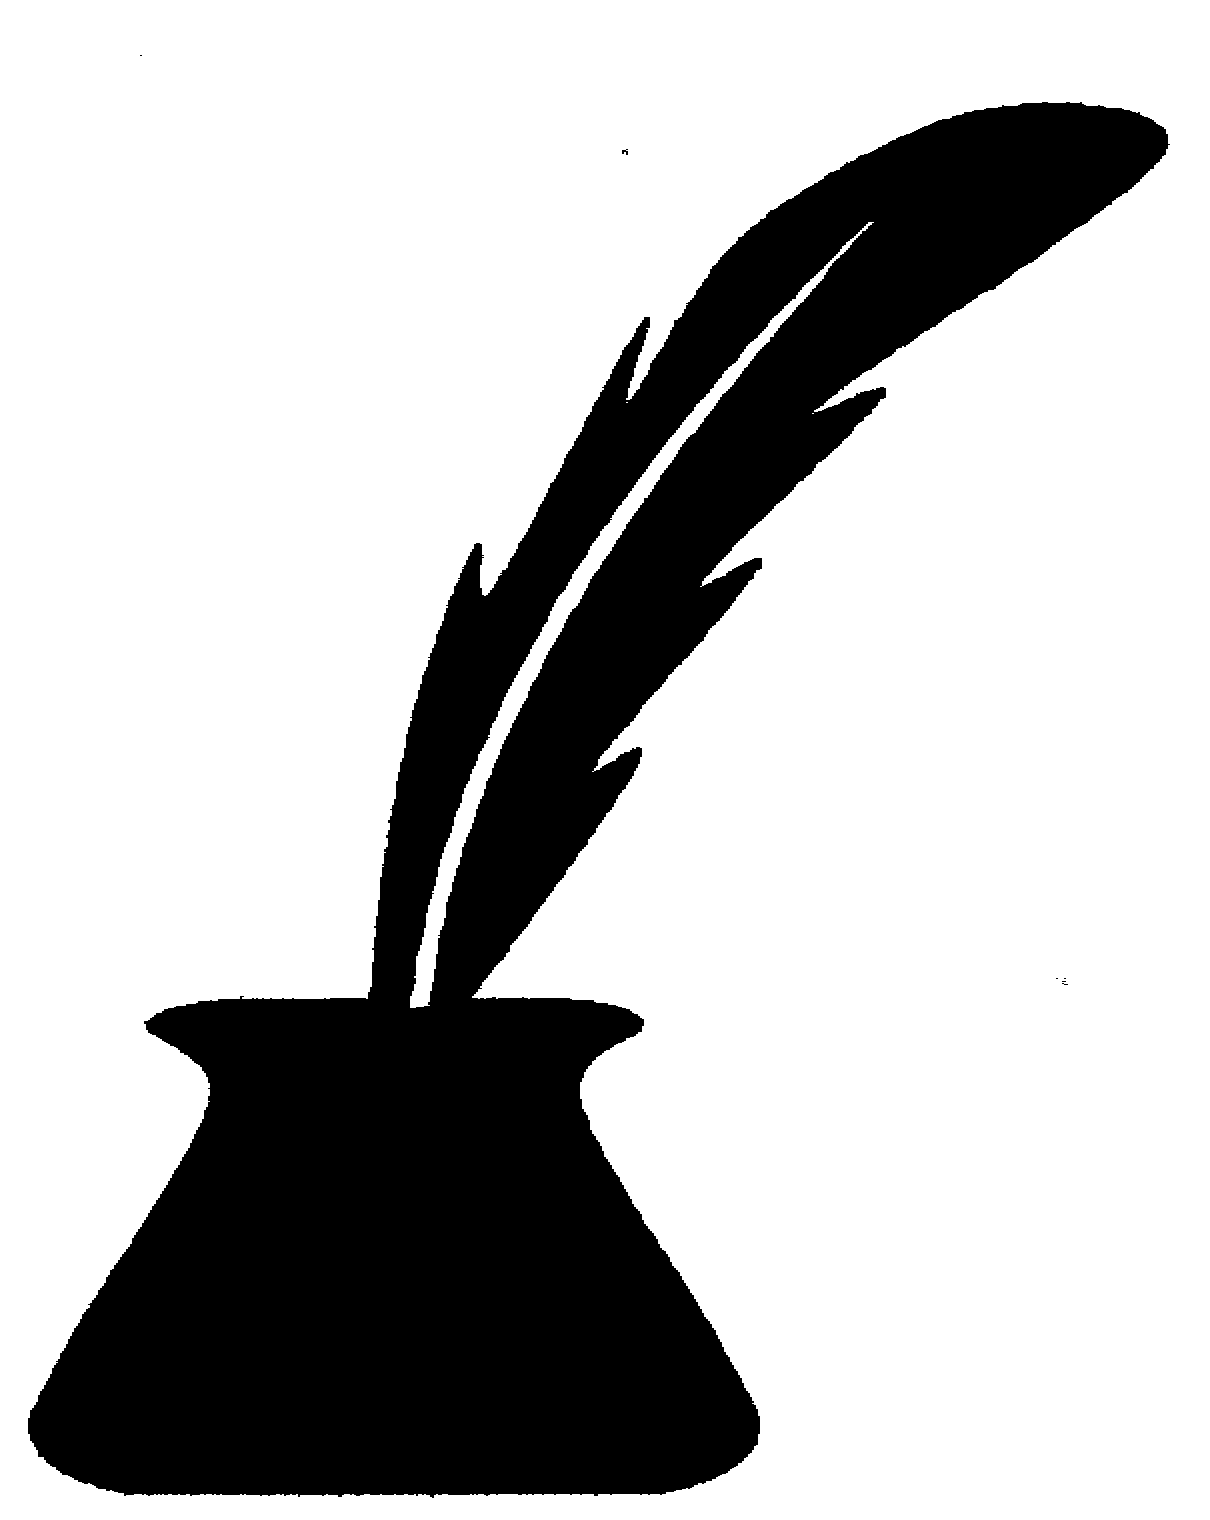 Ink pen pen with ink feather clip art clipart 2